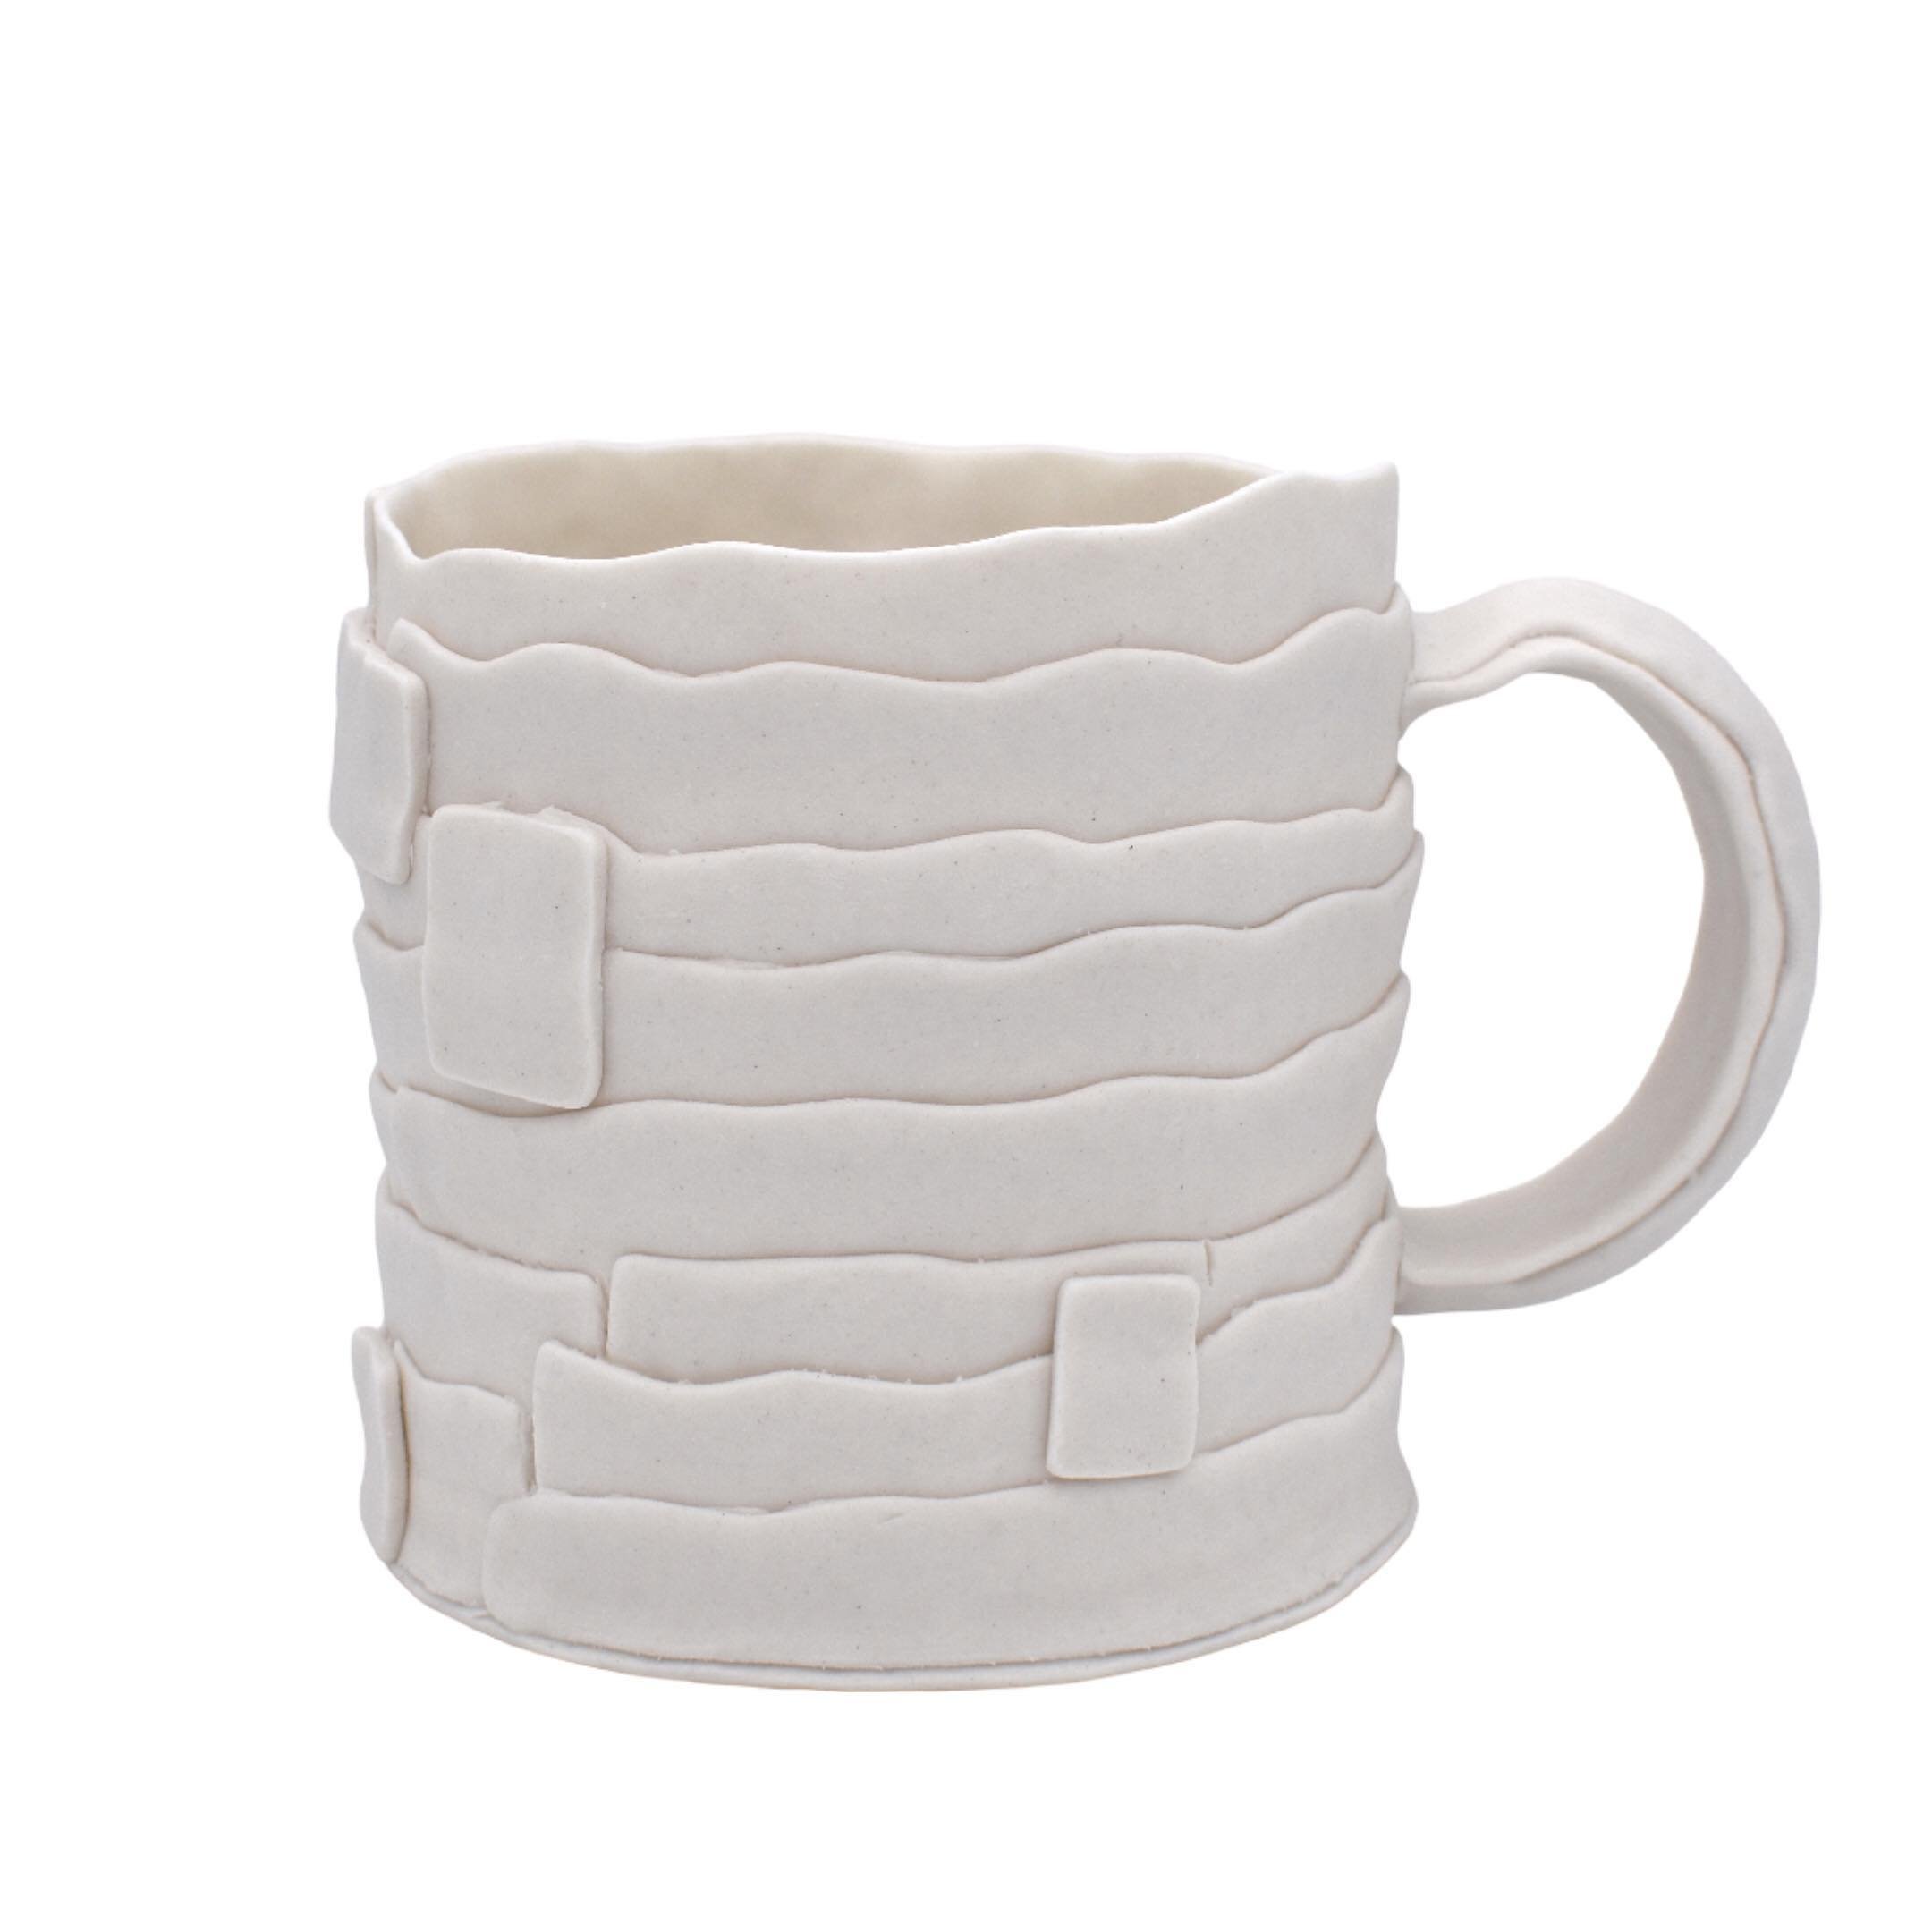 I once had a student whose housemate ate everything from a mug &mdash;  including lasagna! Incredulous, they made them a special mug just for lasagna. What is your boundary for mug foods? Ice cream? Cereal? Lasagna?
.
.
.
.
#contemporarycraft #porcel